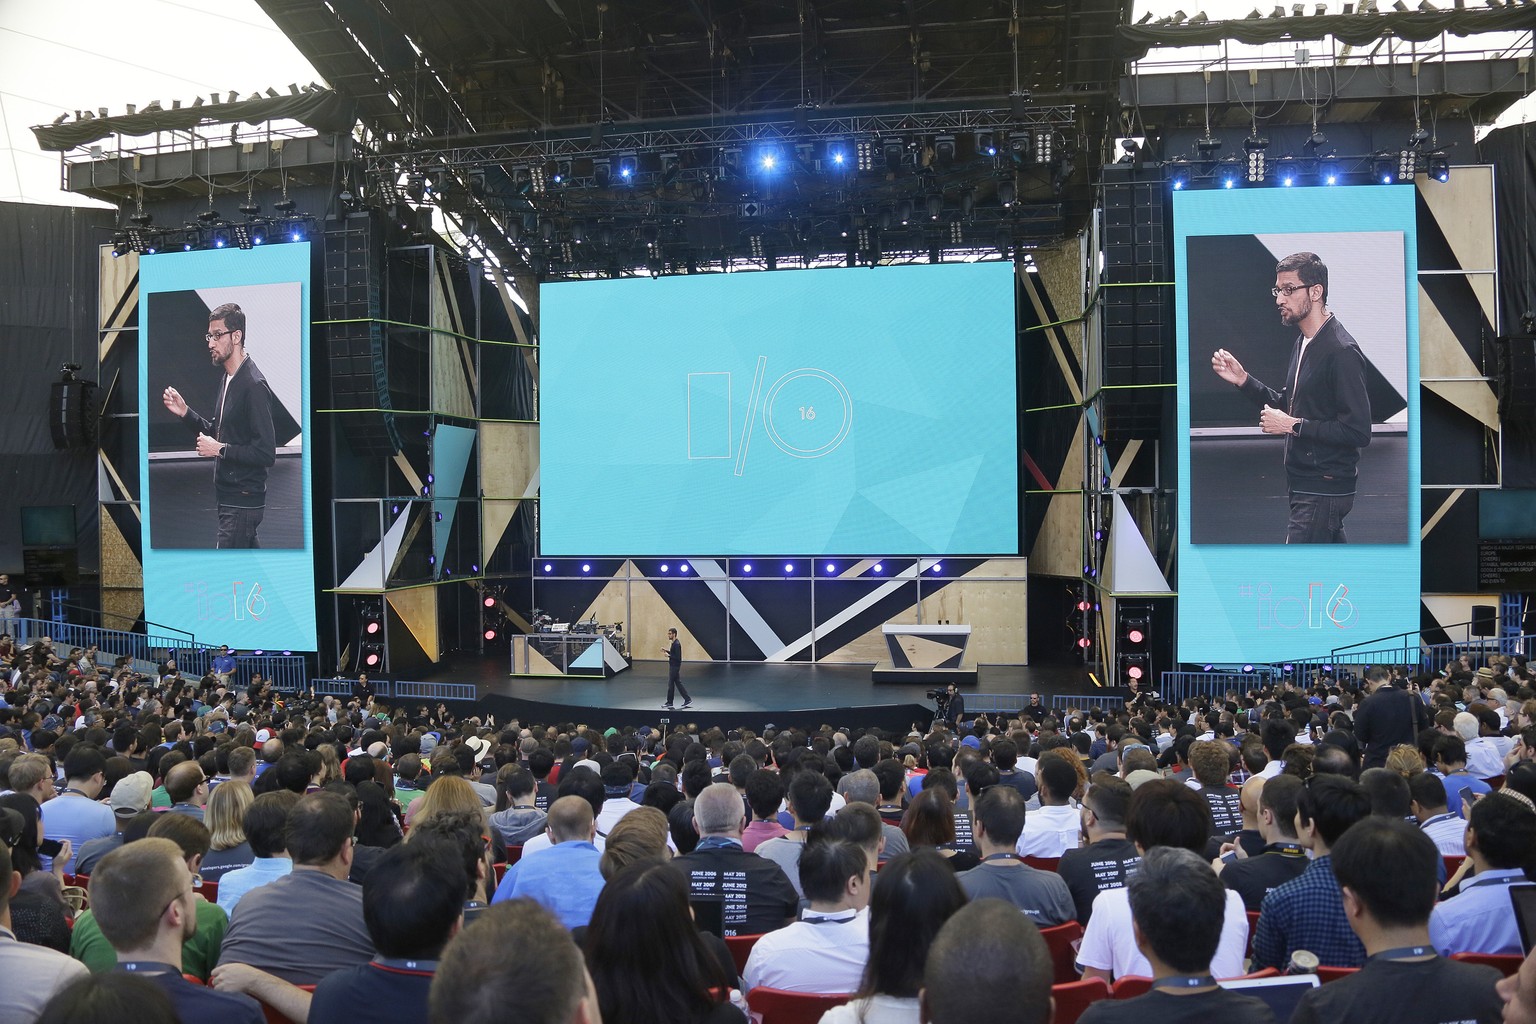 Google CEO Sundar Pichai walks on stage to deliver the keynote address of the Google I/O conference, Wednesday, May 18, 2016, in Mountain View, Calif. Google is unveiling its vision for phones, cars,  ...